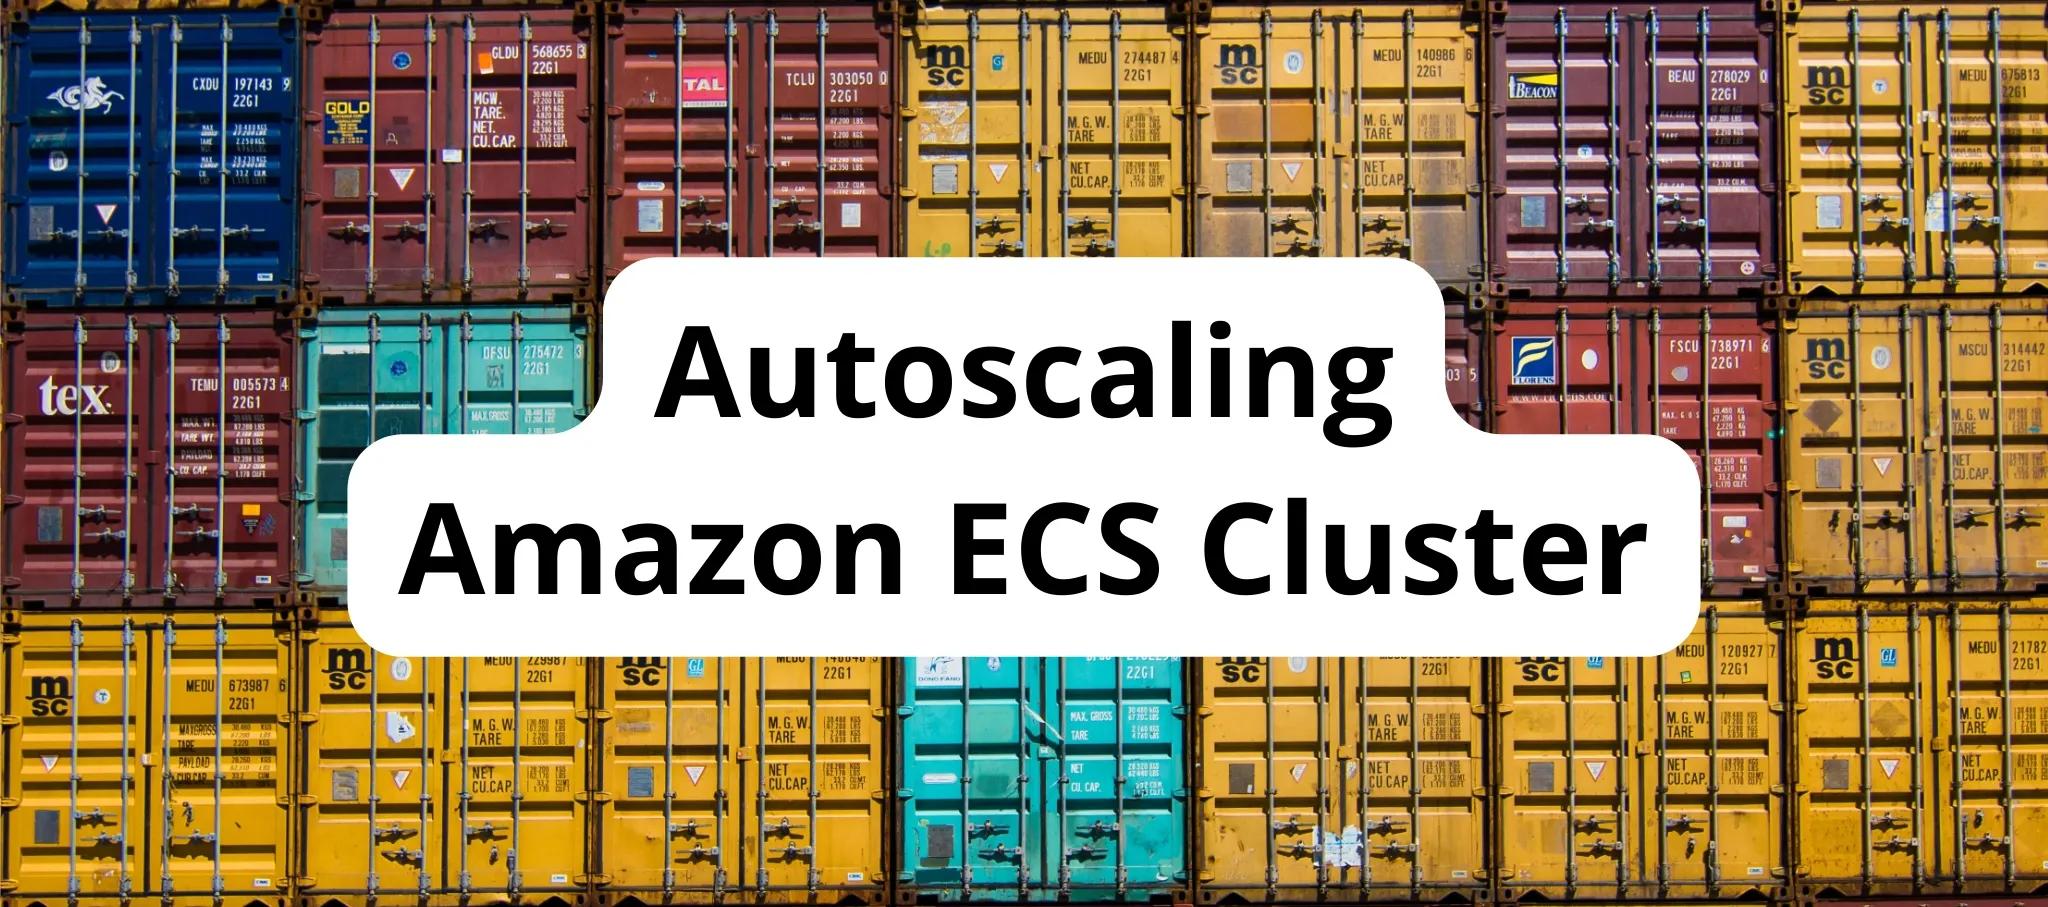 Autoscaling solution for Amazon ECS Cluster